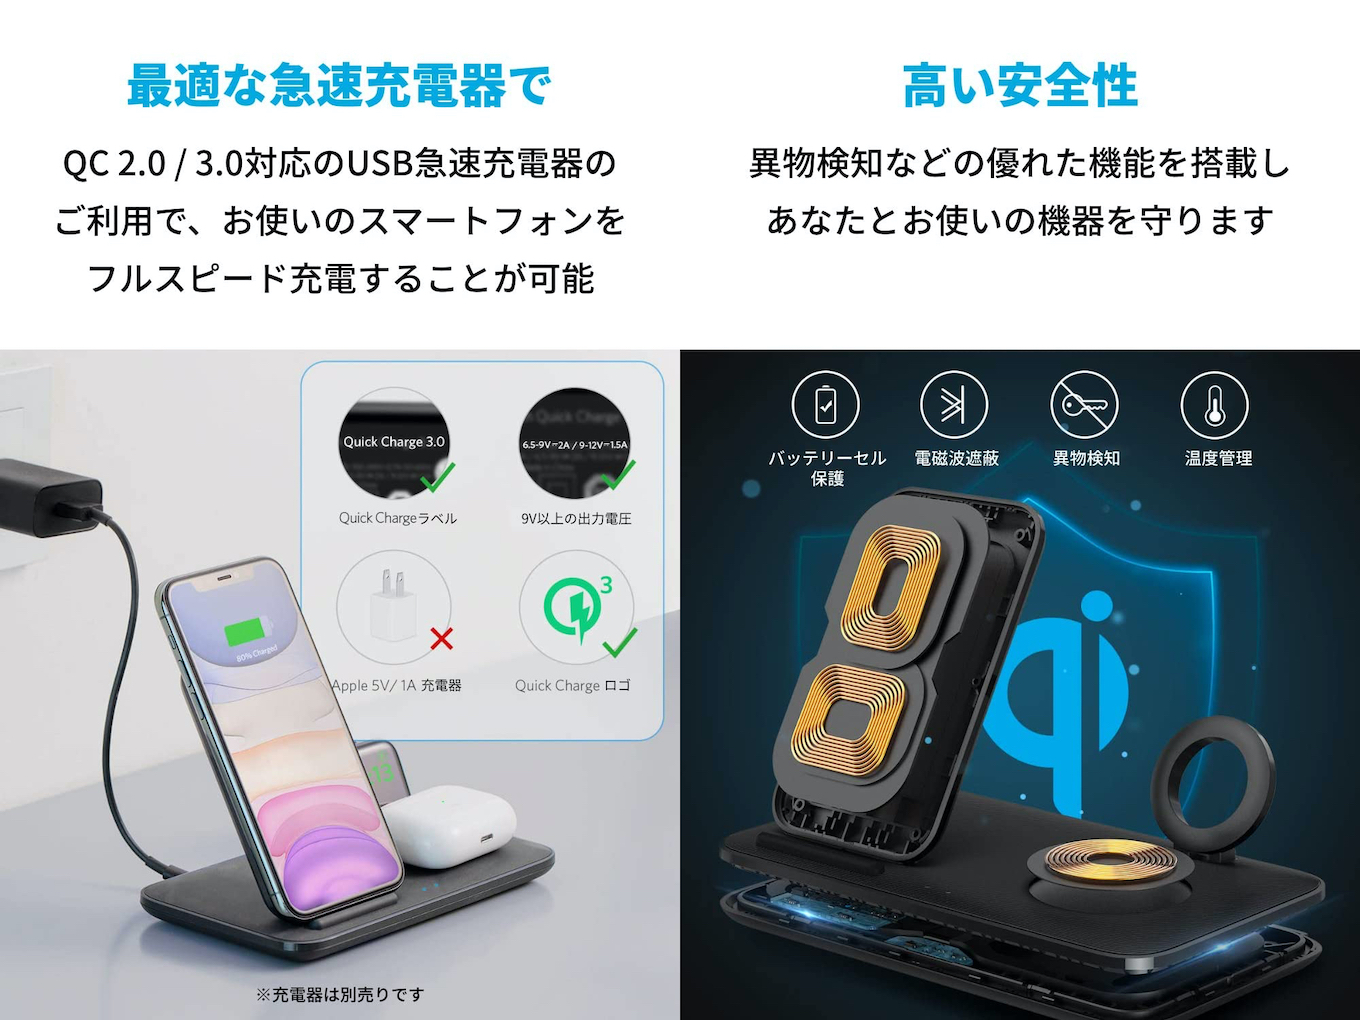 Anker PowerWave+ 3-in-1 stand with Watch Holderの仕様